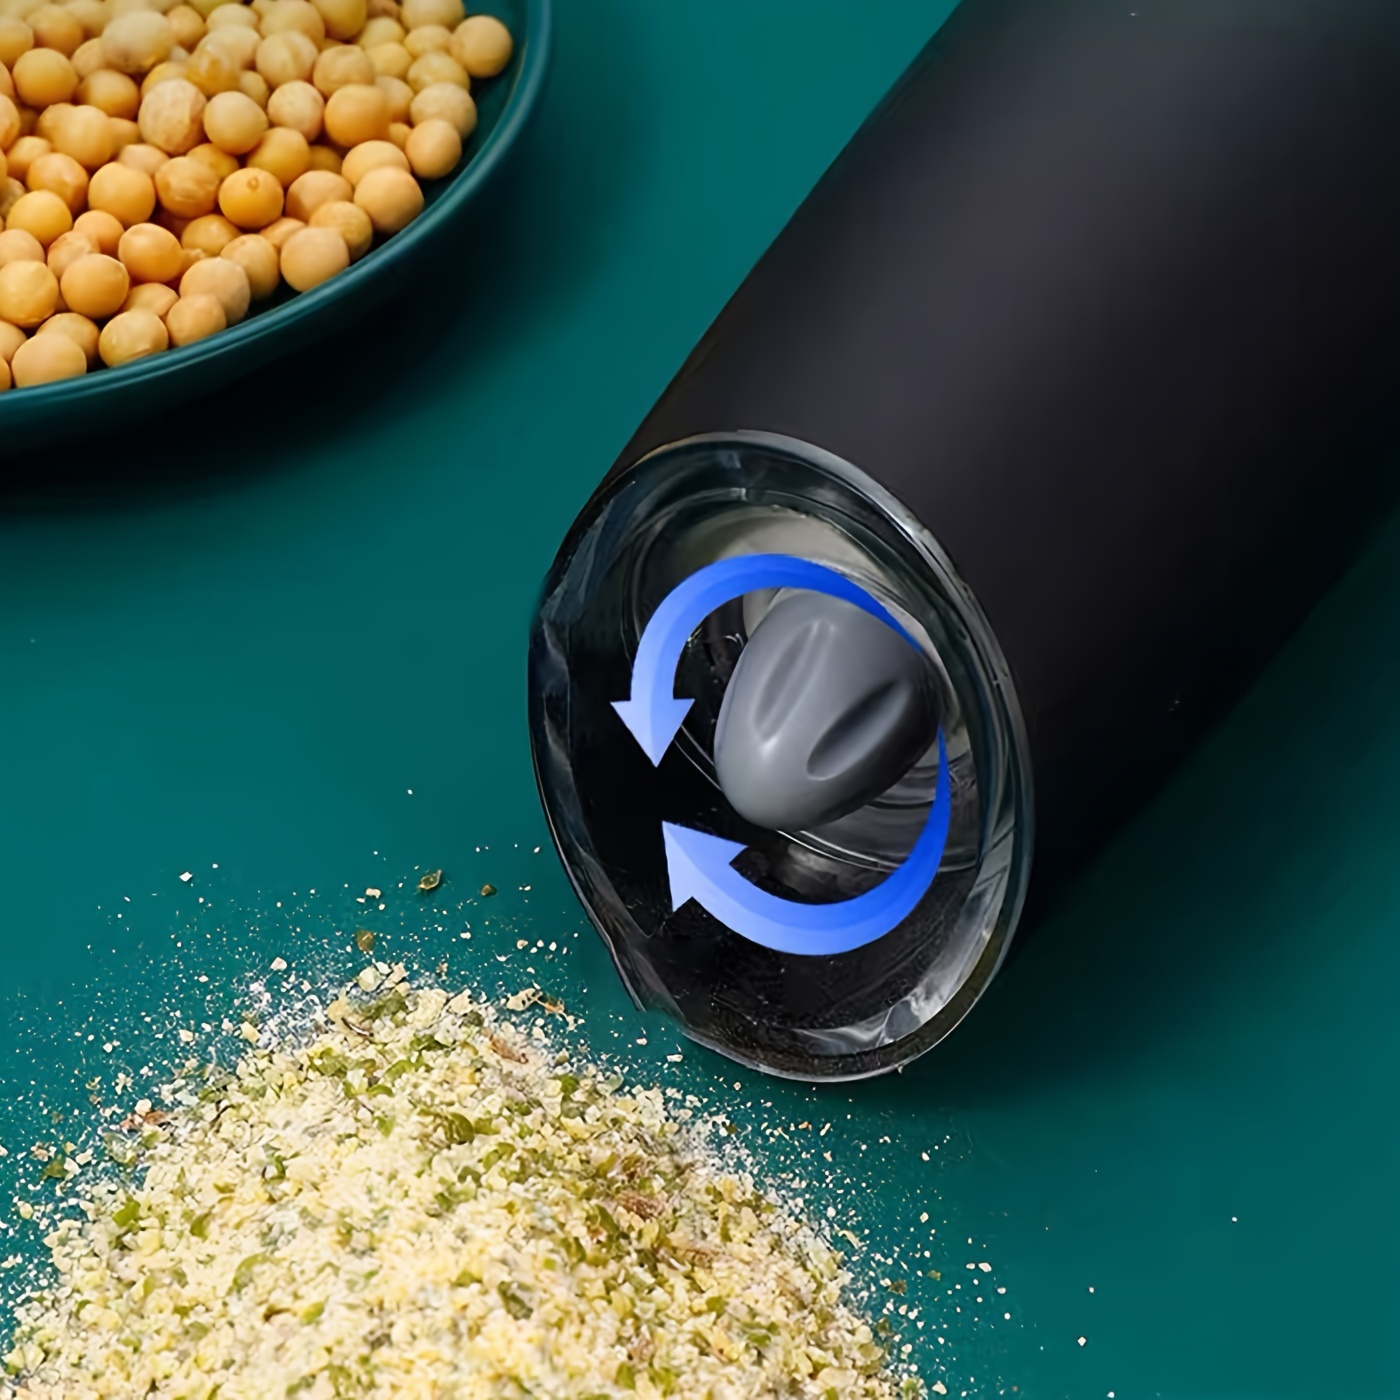 Gravity Electric Pepper and Salt Grinder Set [White Light] Battery Operated Automatic Pepper and Salt Mills with Light,Adjustable Coarseness,One